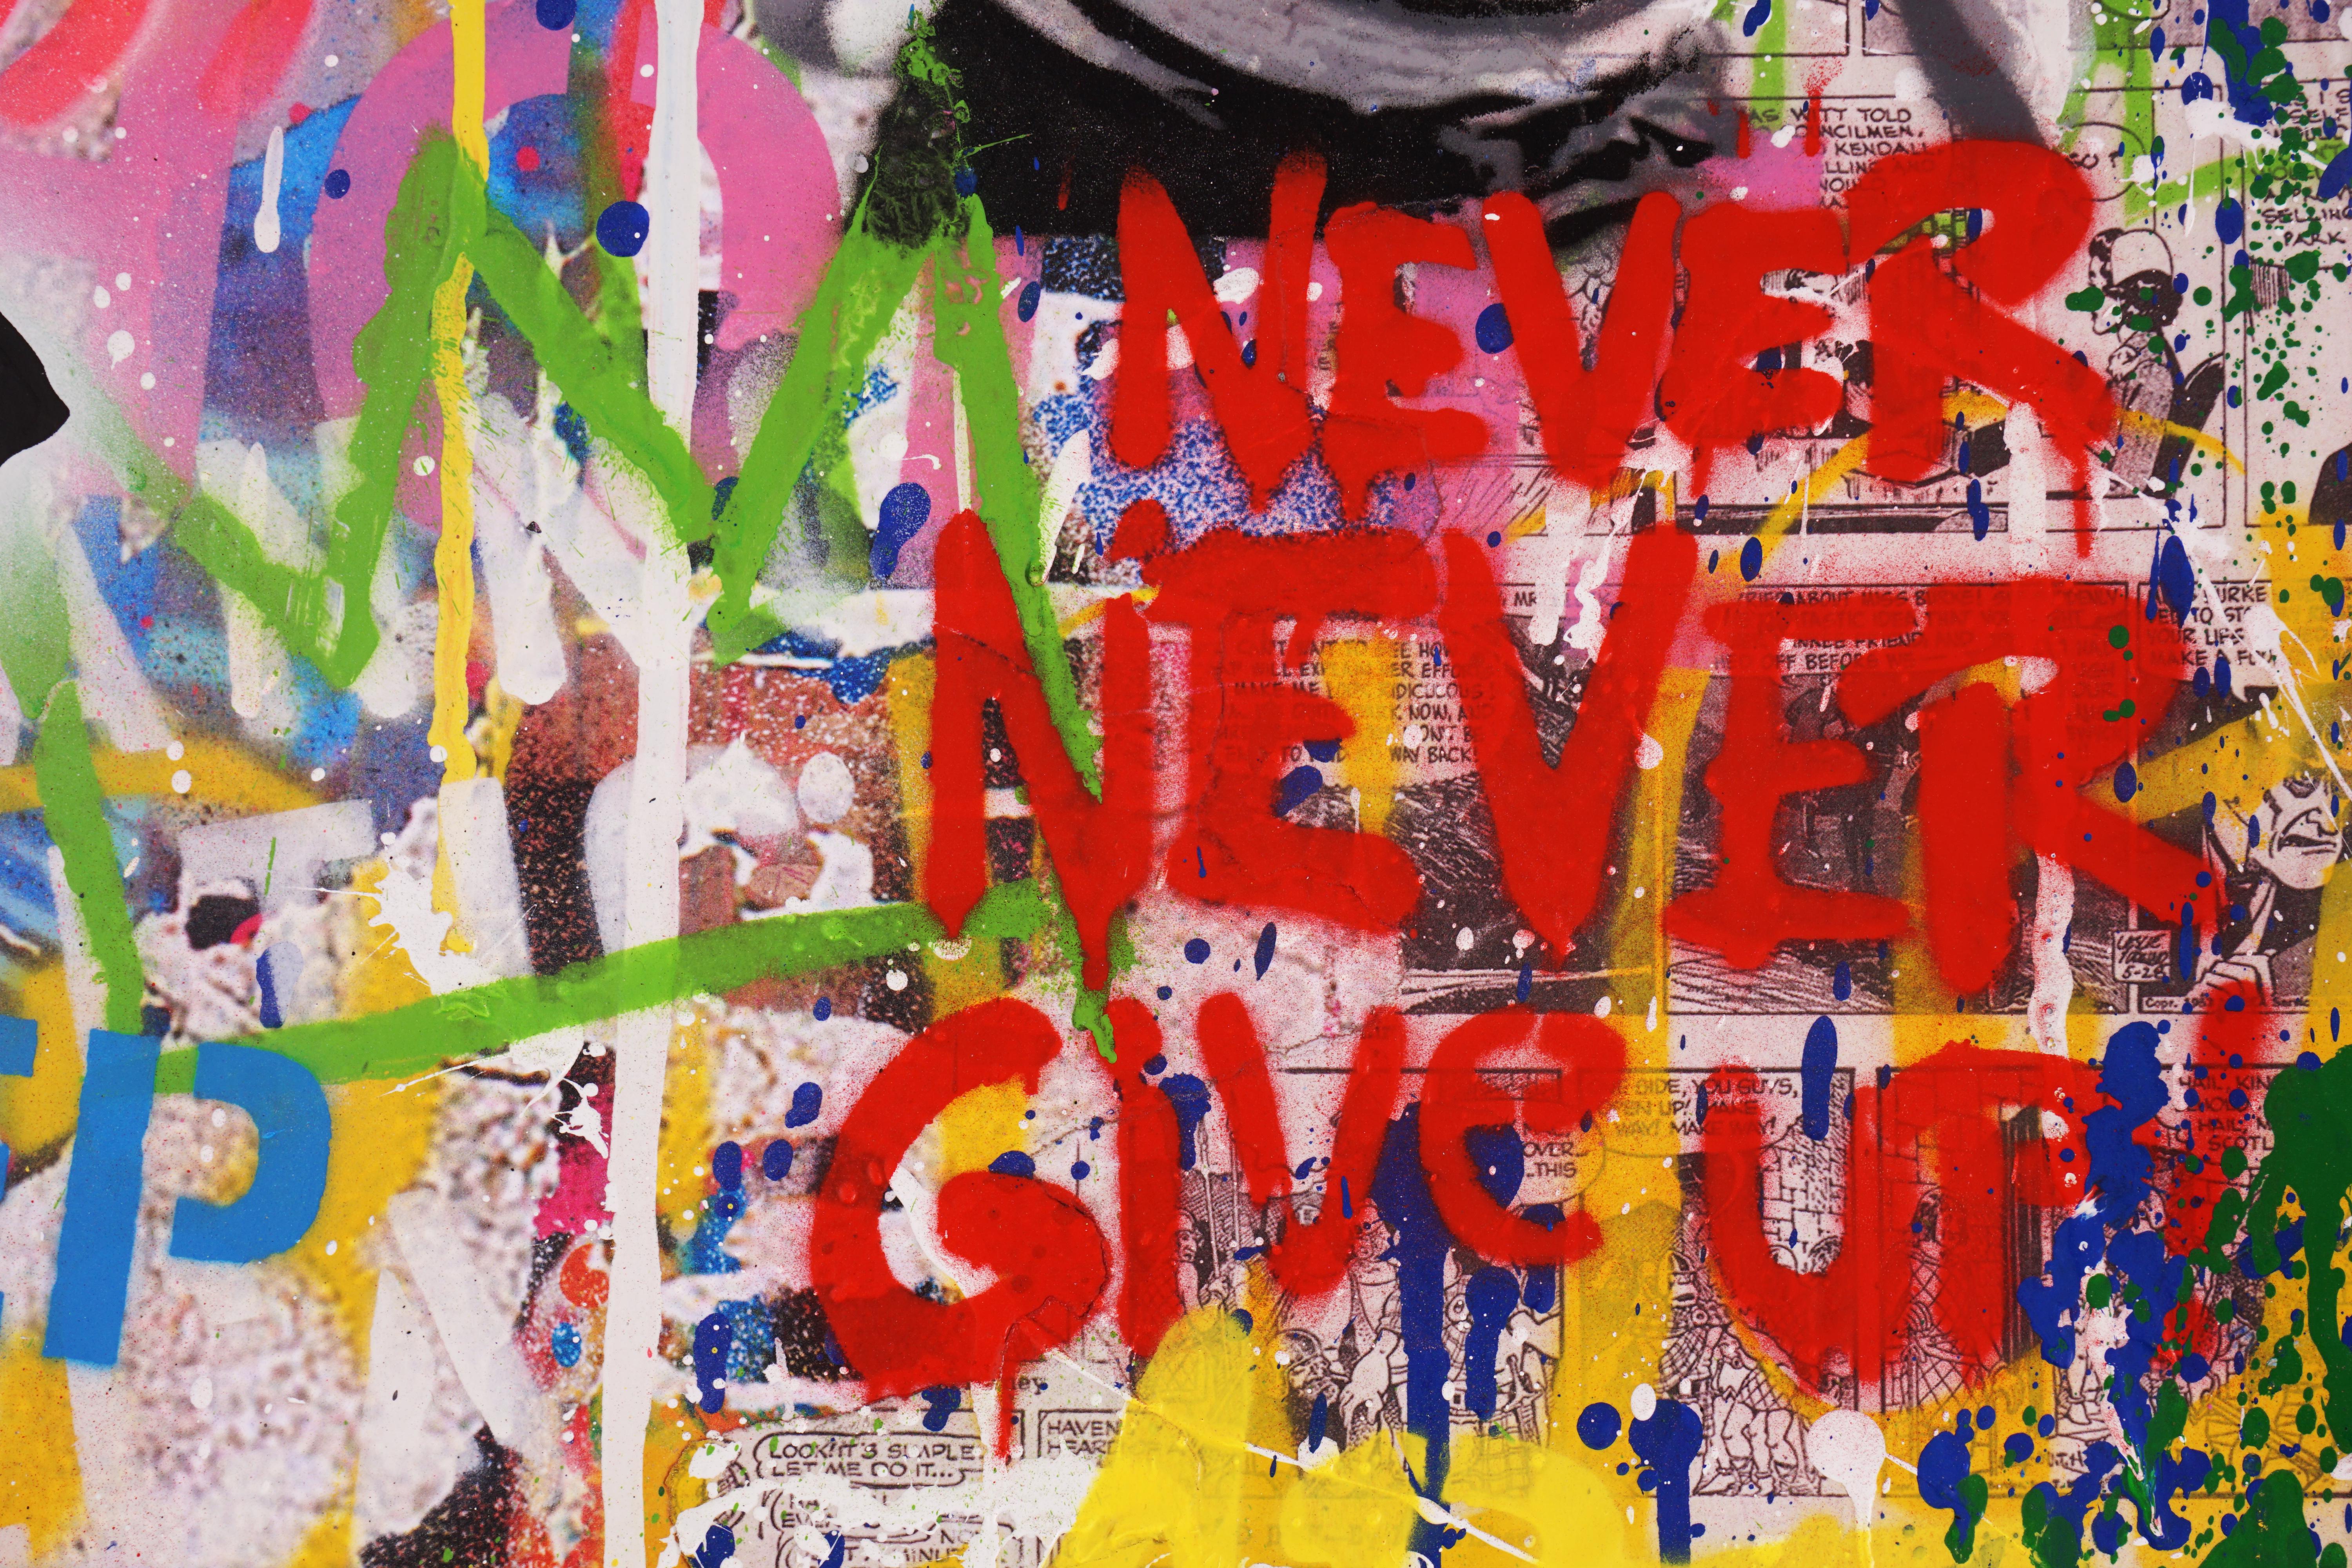 The graffiti street-art meets fine-art 'Balloon Girl' is a pop art masterpiece made with vibrant dripping acrylic paint, layered stencil, and mixed media, created in 2021 by contemporary street pop artist, Mr. Brainwash. The boldly optimistic